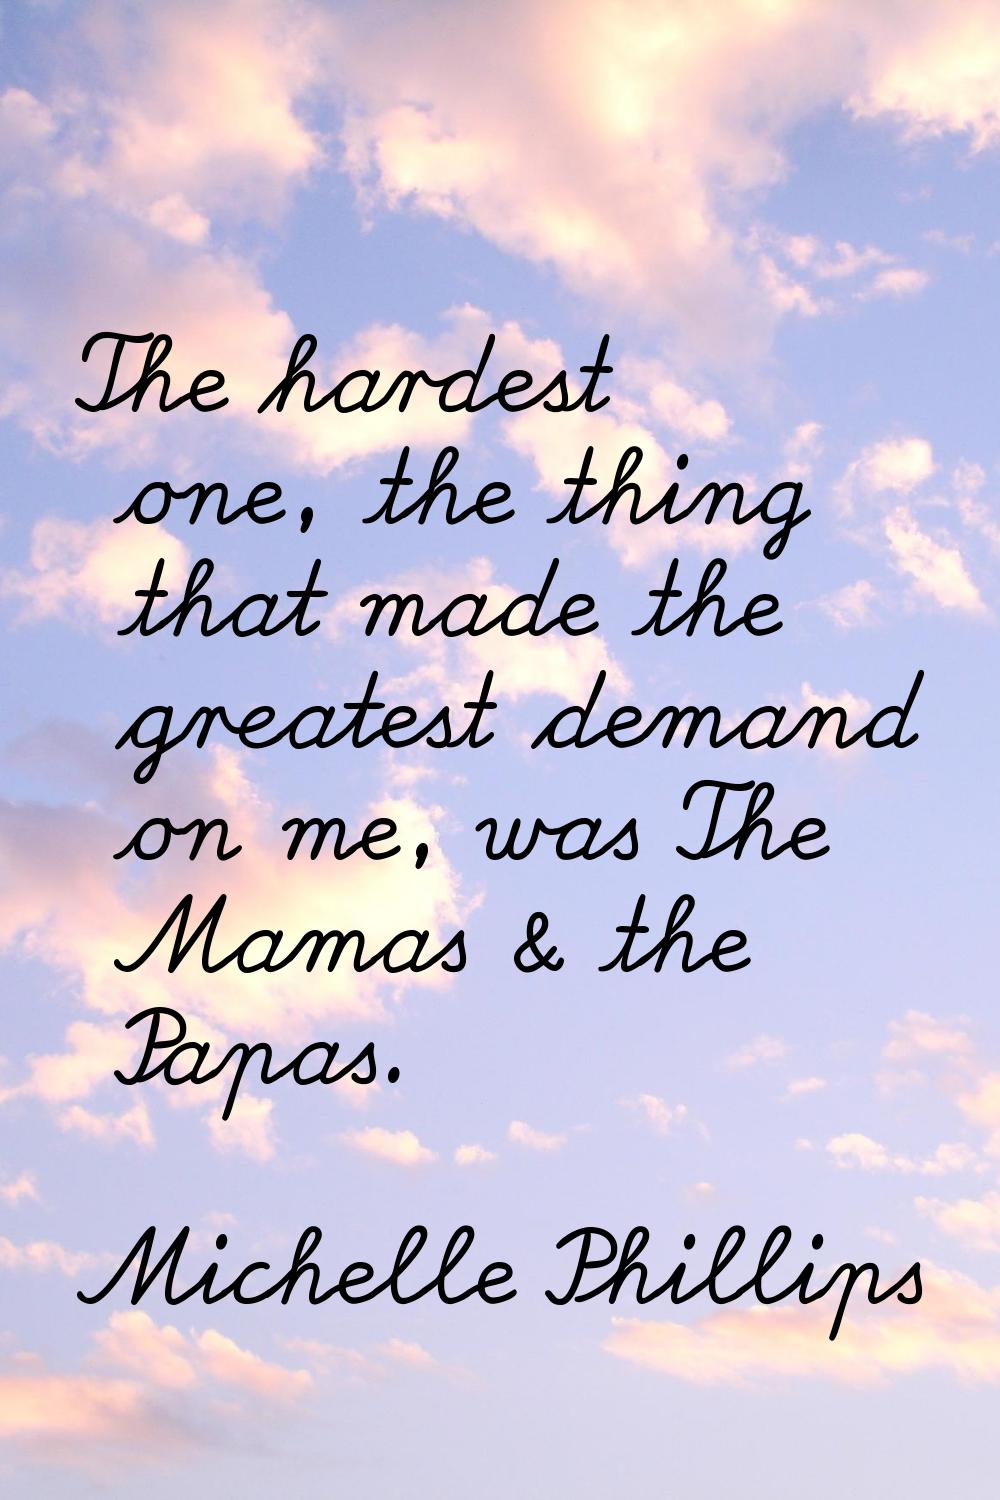 The hardest one, the thing that made the greatest demand on me, was The Mamas & the Papas.